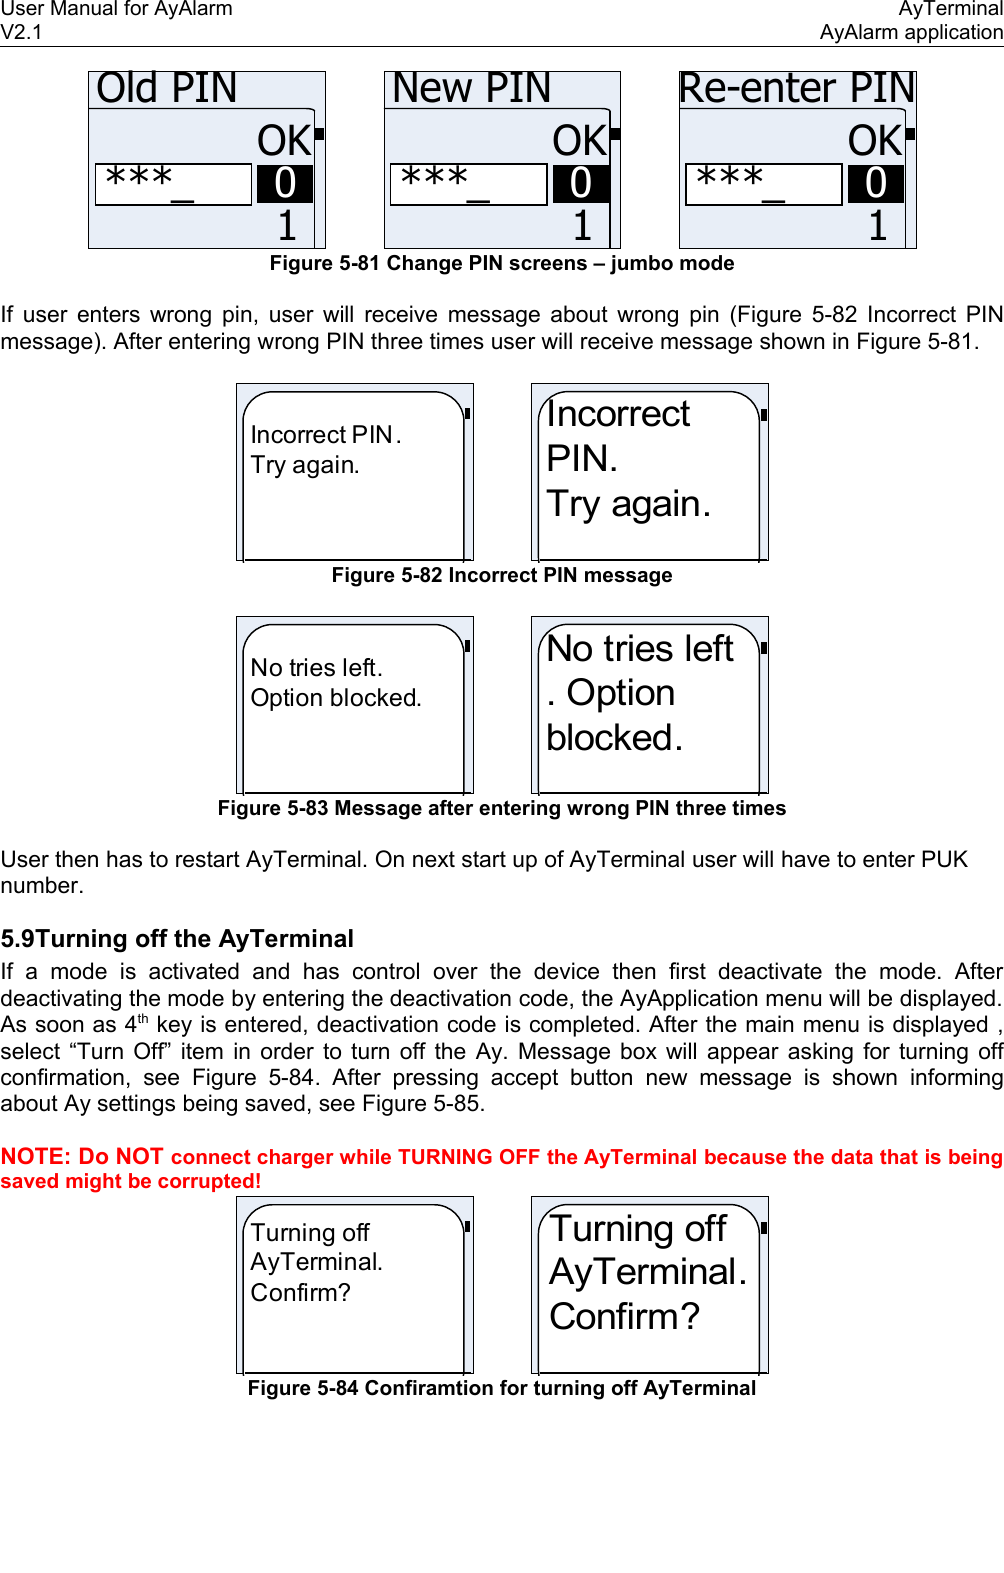 User Manual for AyAlarm AyTerminalV2.1 AyAlarm application***_OK10Old PIN***_OK10New PIN***_OK10Re-enter PINFigure 5-81 Change PIN screens – jumbo modeIf user enters wrong pin, user will receive message about wrong pin (Figure 5-82 Incorrect PINmessage). After entering wrong PIN three times user will receive message shown in Figure 5-81.Incorrect PIN.Try again.IncorrectPIN.Try again. Figure 5-82 Incorrect PIN messageNo tries left.Option blocked.No tries left. Option blocked.Figure 5-83 Message after entering wrong PIN three timesUser then has to restart AyTerminal. On next start up of AyTerminal user will have to enter PUK number.5.9Turning off the AyTerminalIf a mode is activated and  has control over the device   then   first   deactivate   the  mode. After deactivating the mode by entering the deactivation code, the AyApplication menu will be displayed. As soon as 4th key is entered, deactivation code is completed. After the main menu is displayed , select “Turn Off” item in order to turn off the Ay. Message box will appear asking for turning off confirmation, see  Figure 5-84.  After  pressing accept button new message  is shown  informing about Ay settings being saved, see Figure 5-85.NOTE: Do NOT connect charger while TURNING OFF the AyTerminal because the data that is being saved might be corrupted!Turning off AyTerminal. Confirm?Turning off AyTerminal. Confirm?Figure 5-84 Confiramtion for turning off AyTerminal